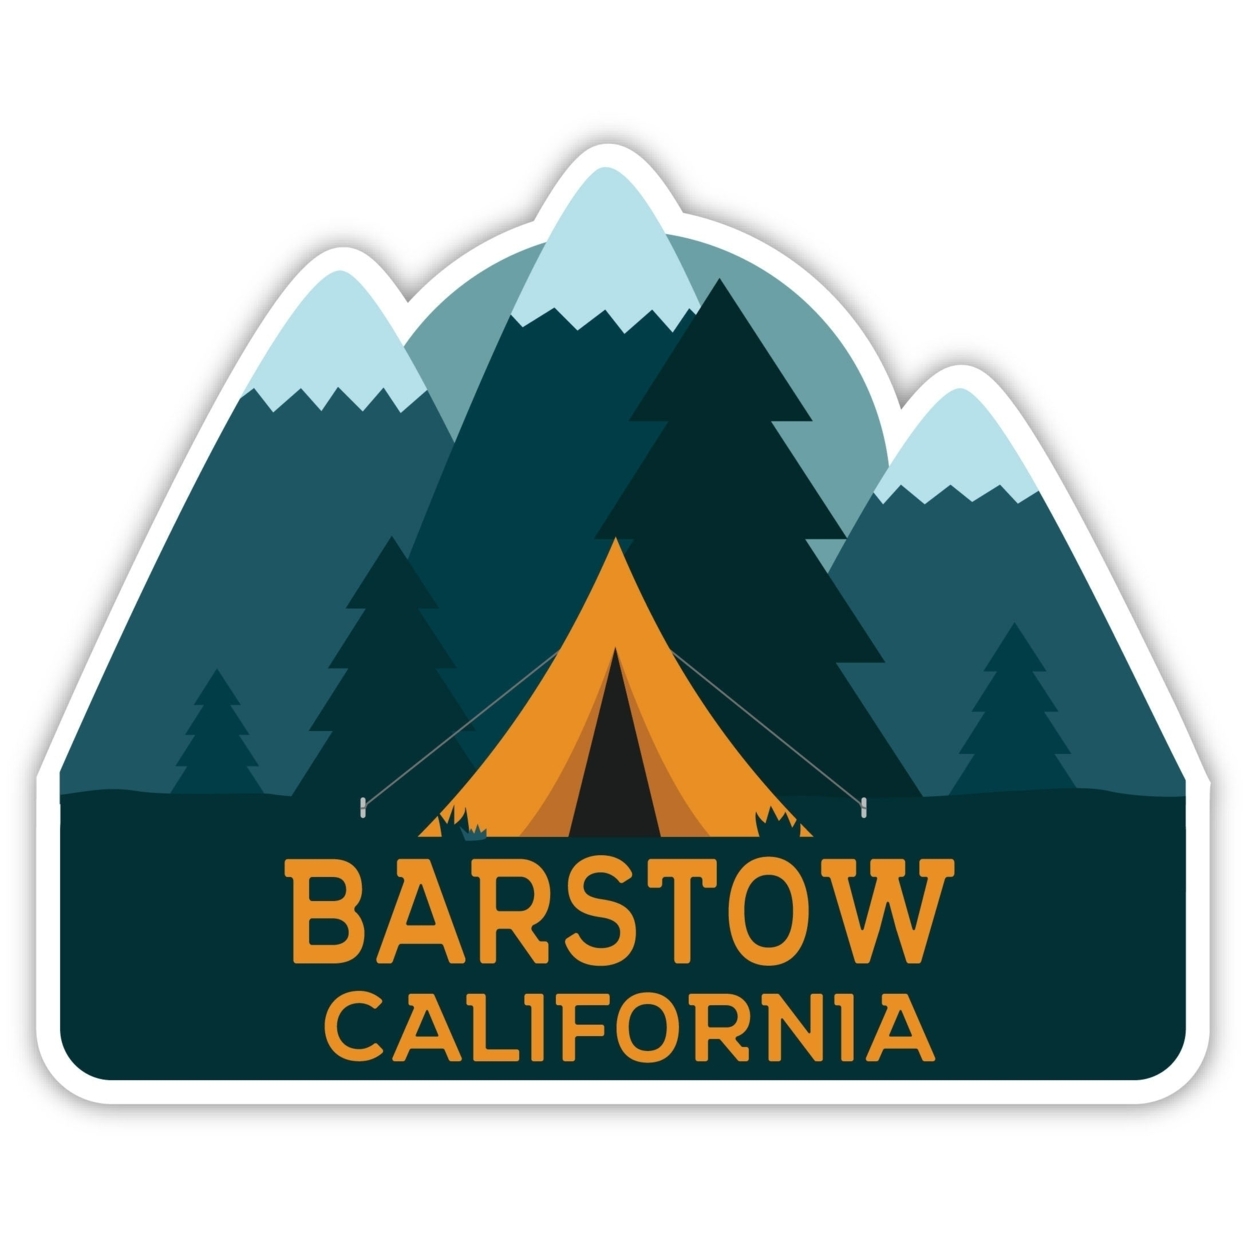 Barstow California Souvenir Decorative Stickers (Choose Theme And Size) - Single Unit, 12-Inch, Camp Life